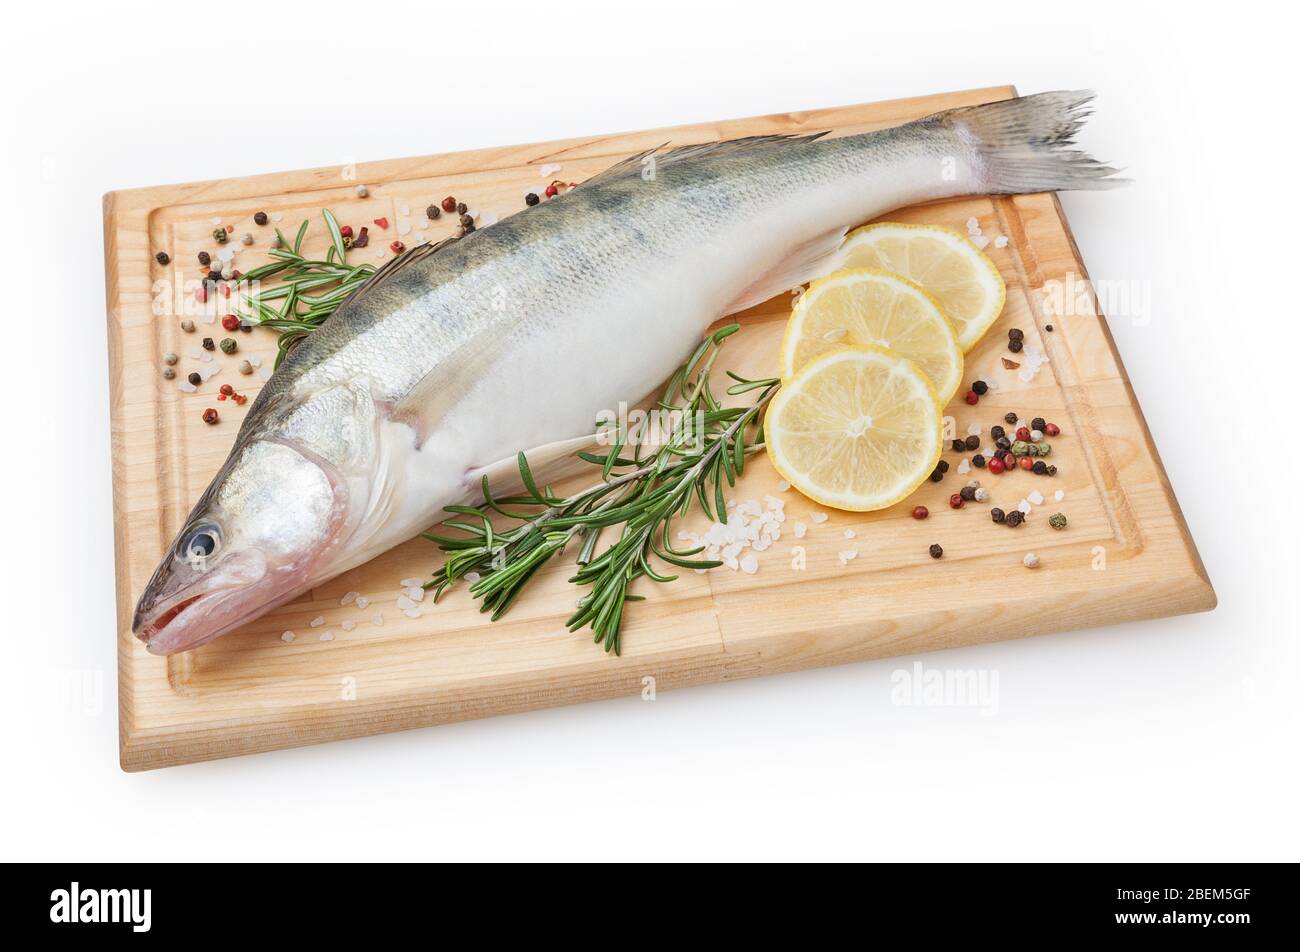 Fresh uncooked pike perch with lemon, rosemary and spice on wooden board isolated on white background with clipping path Stock Photo